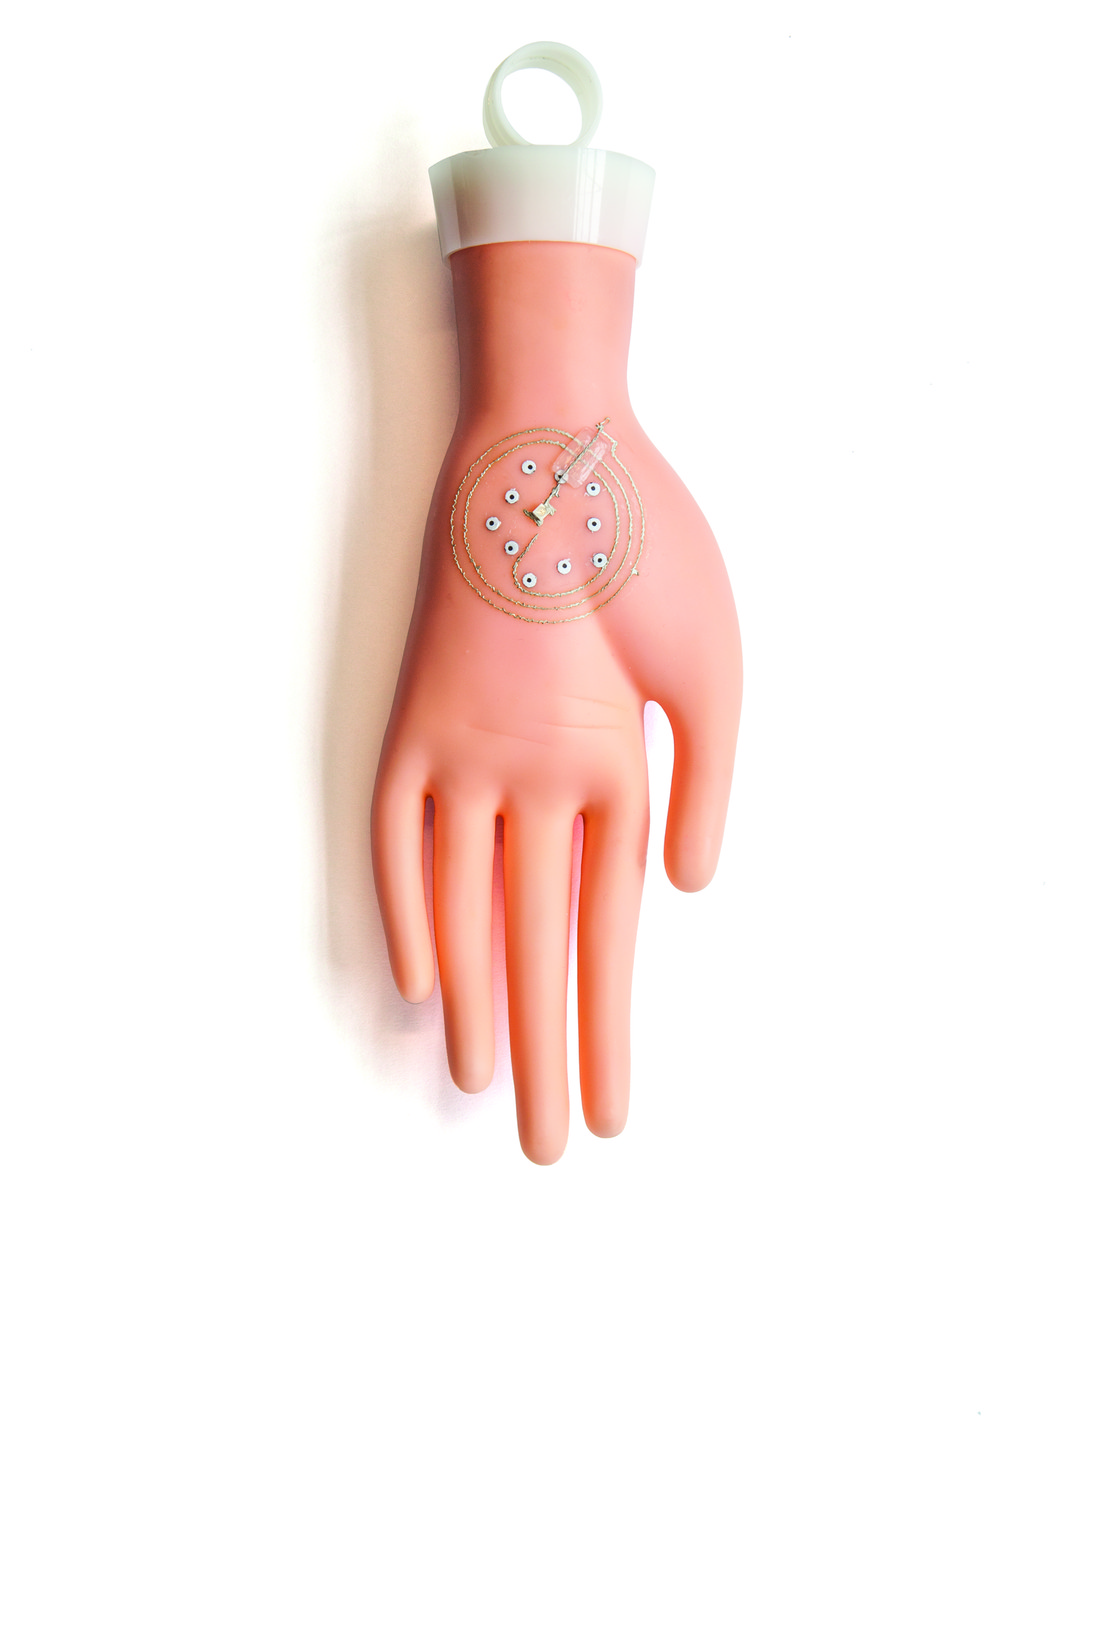 Image of mannequin's hand with electronic wiring printed on it